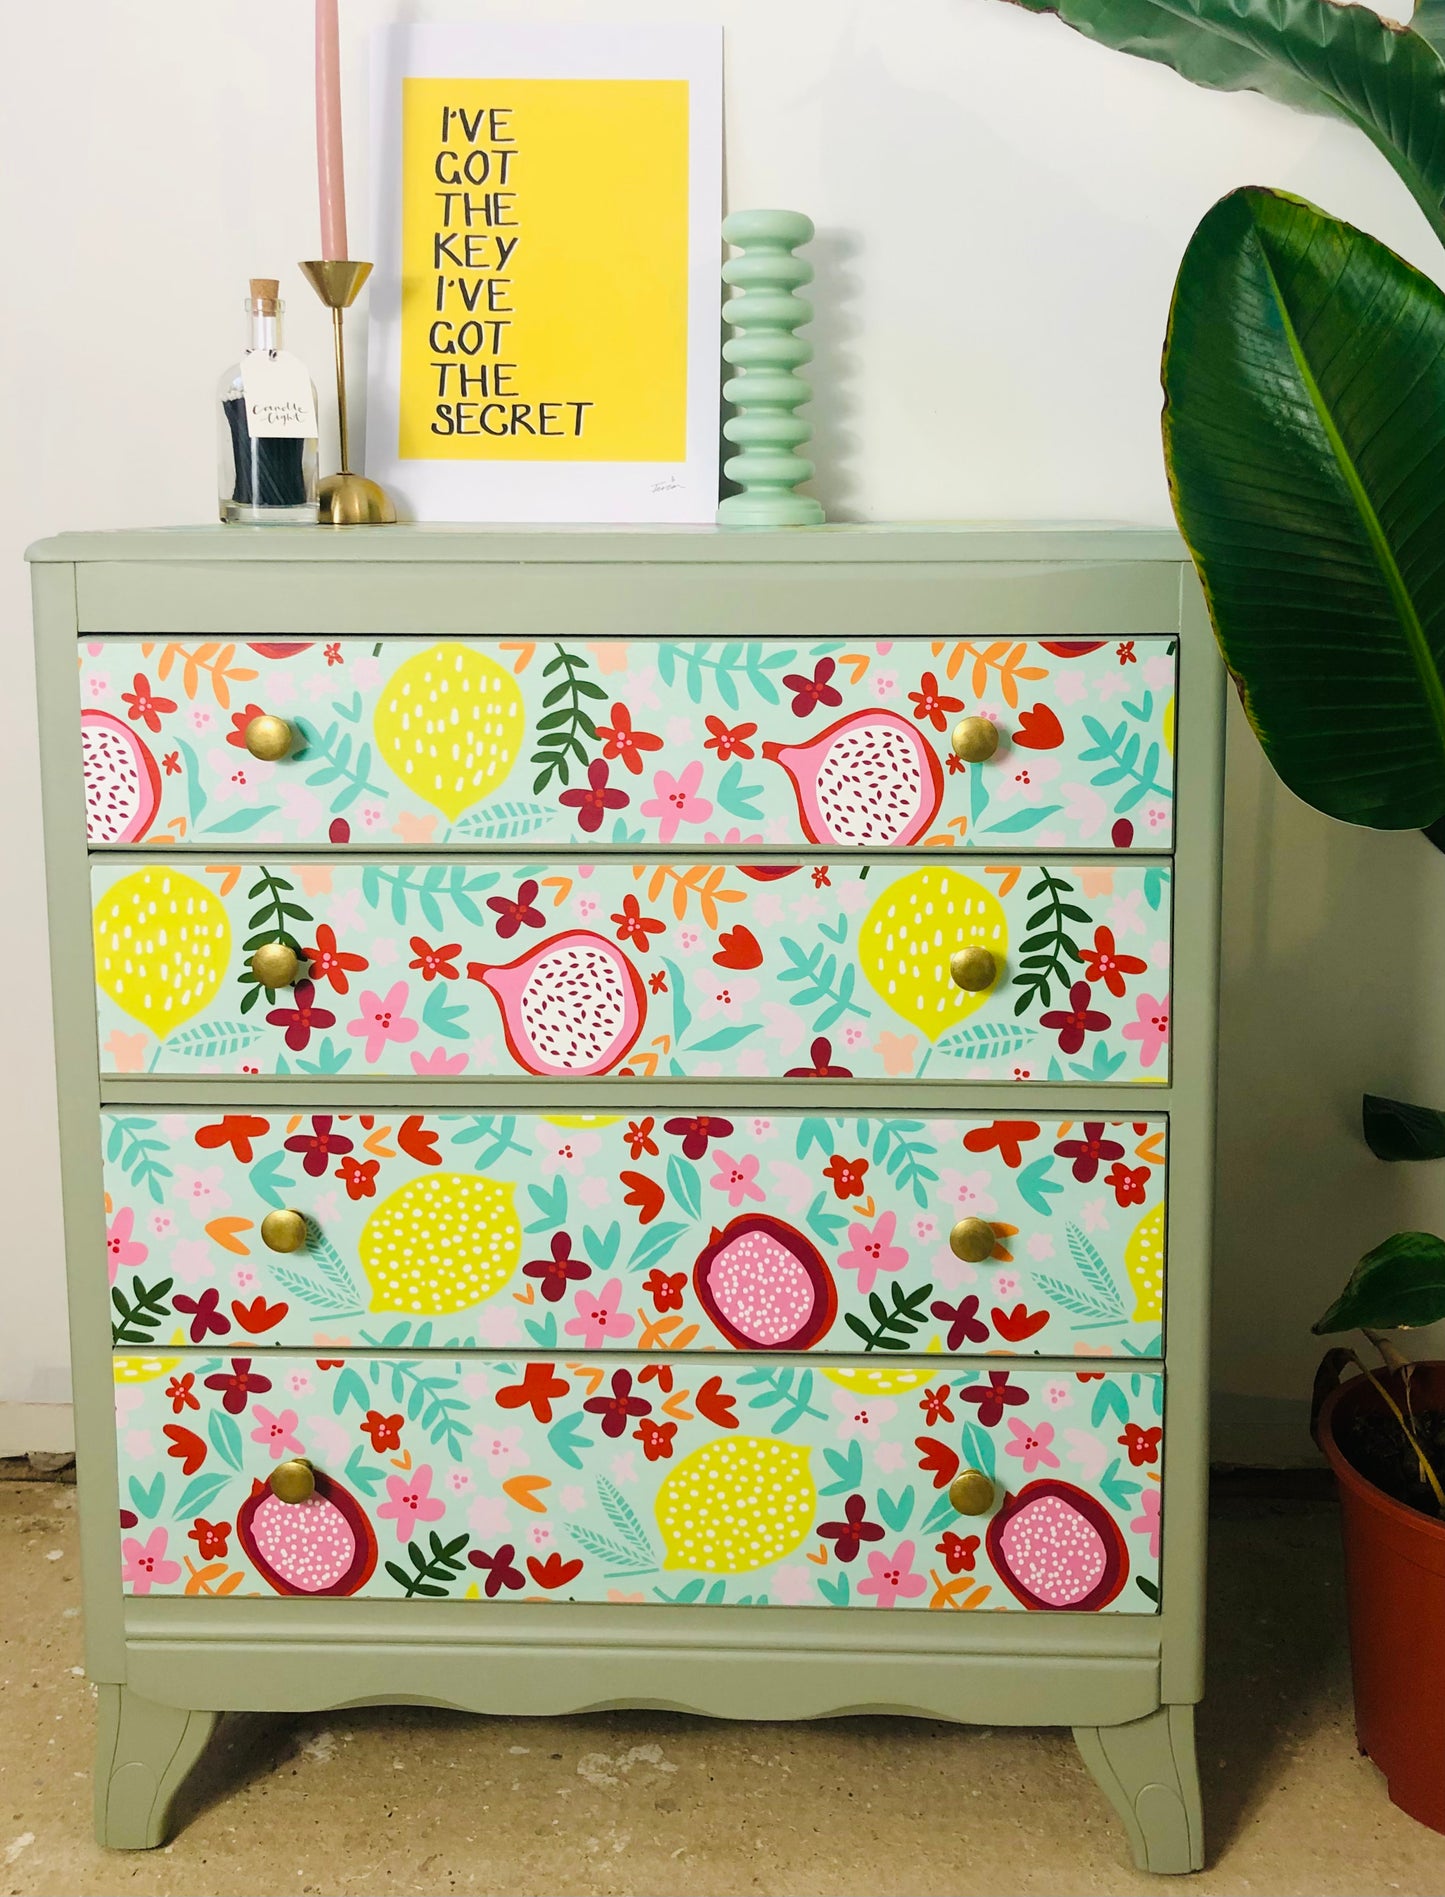 Vintage Harris Lebus chest of drawers, painted neutral green with colourful floral and fruit print wallpaper